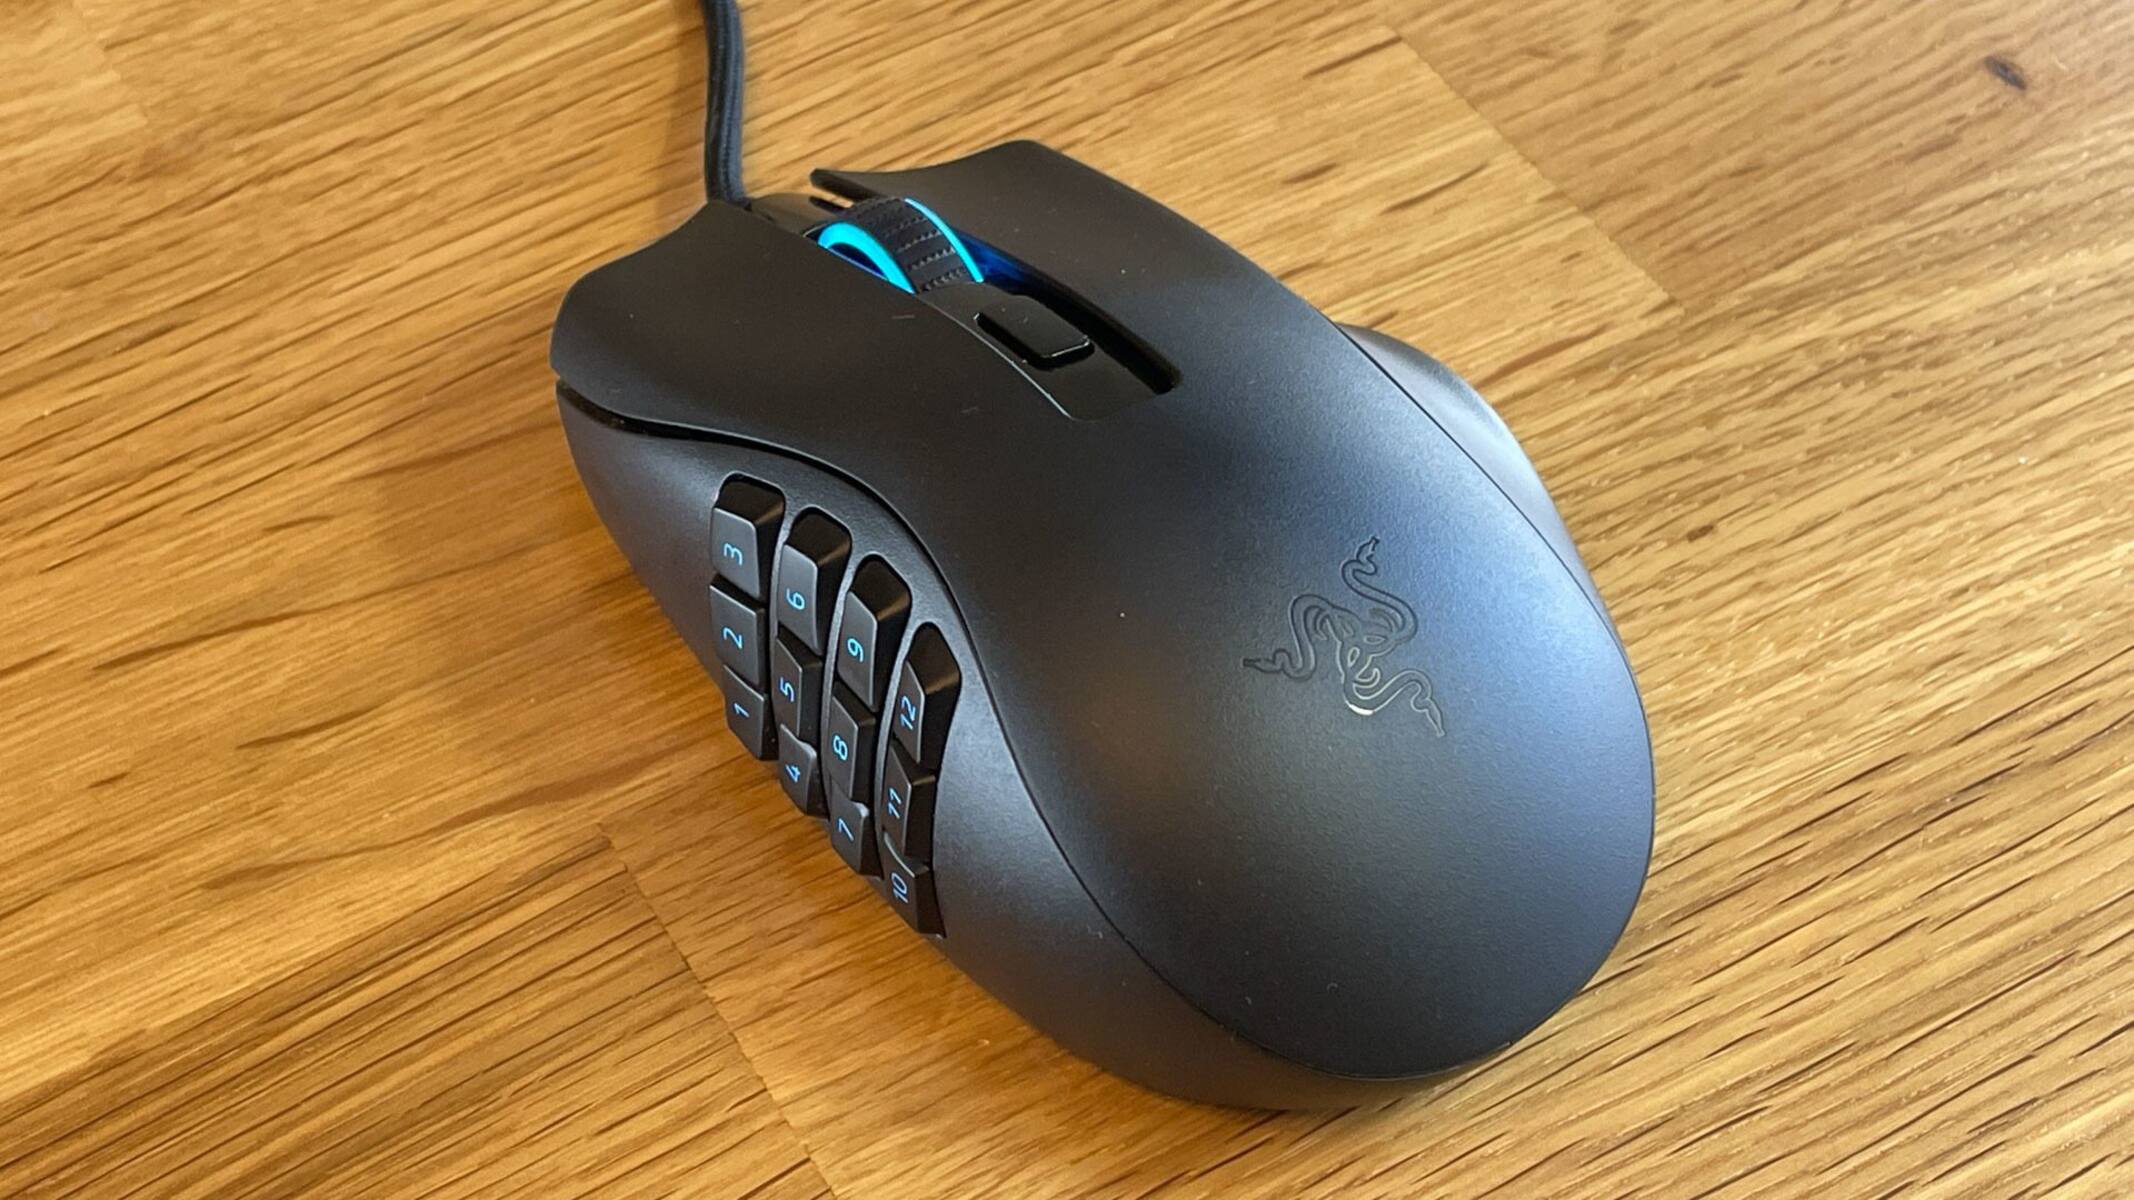 How To Change The Blackweb Gaming Mouse Color